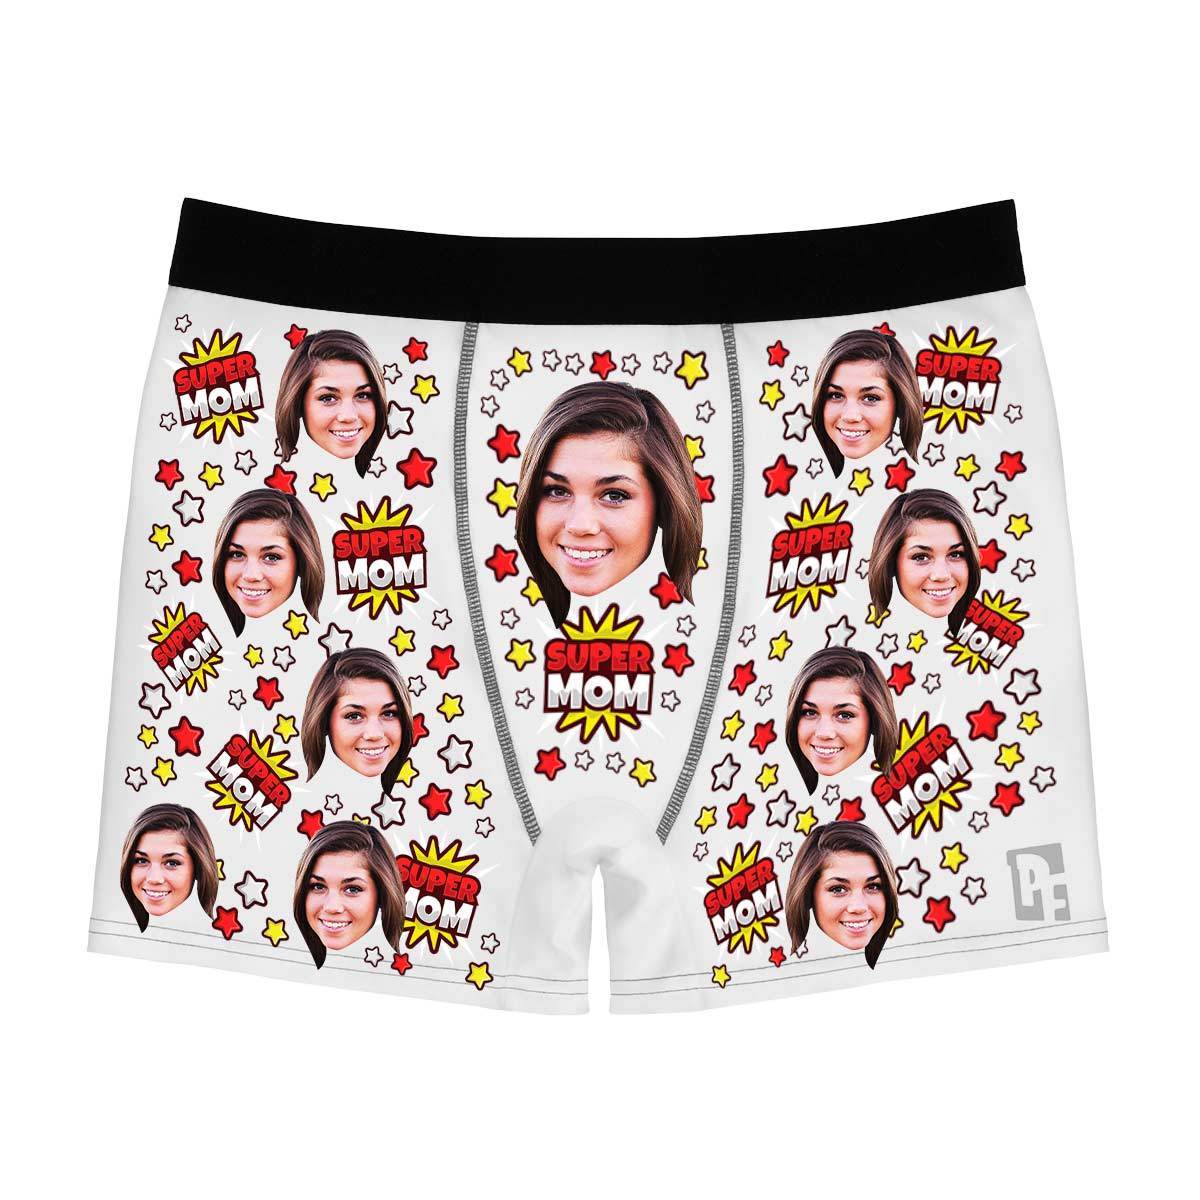 White Super mom men's boxer briefs personalized with photo printed on them